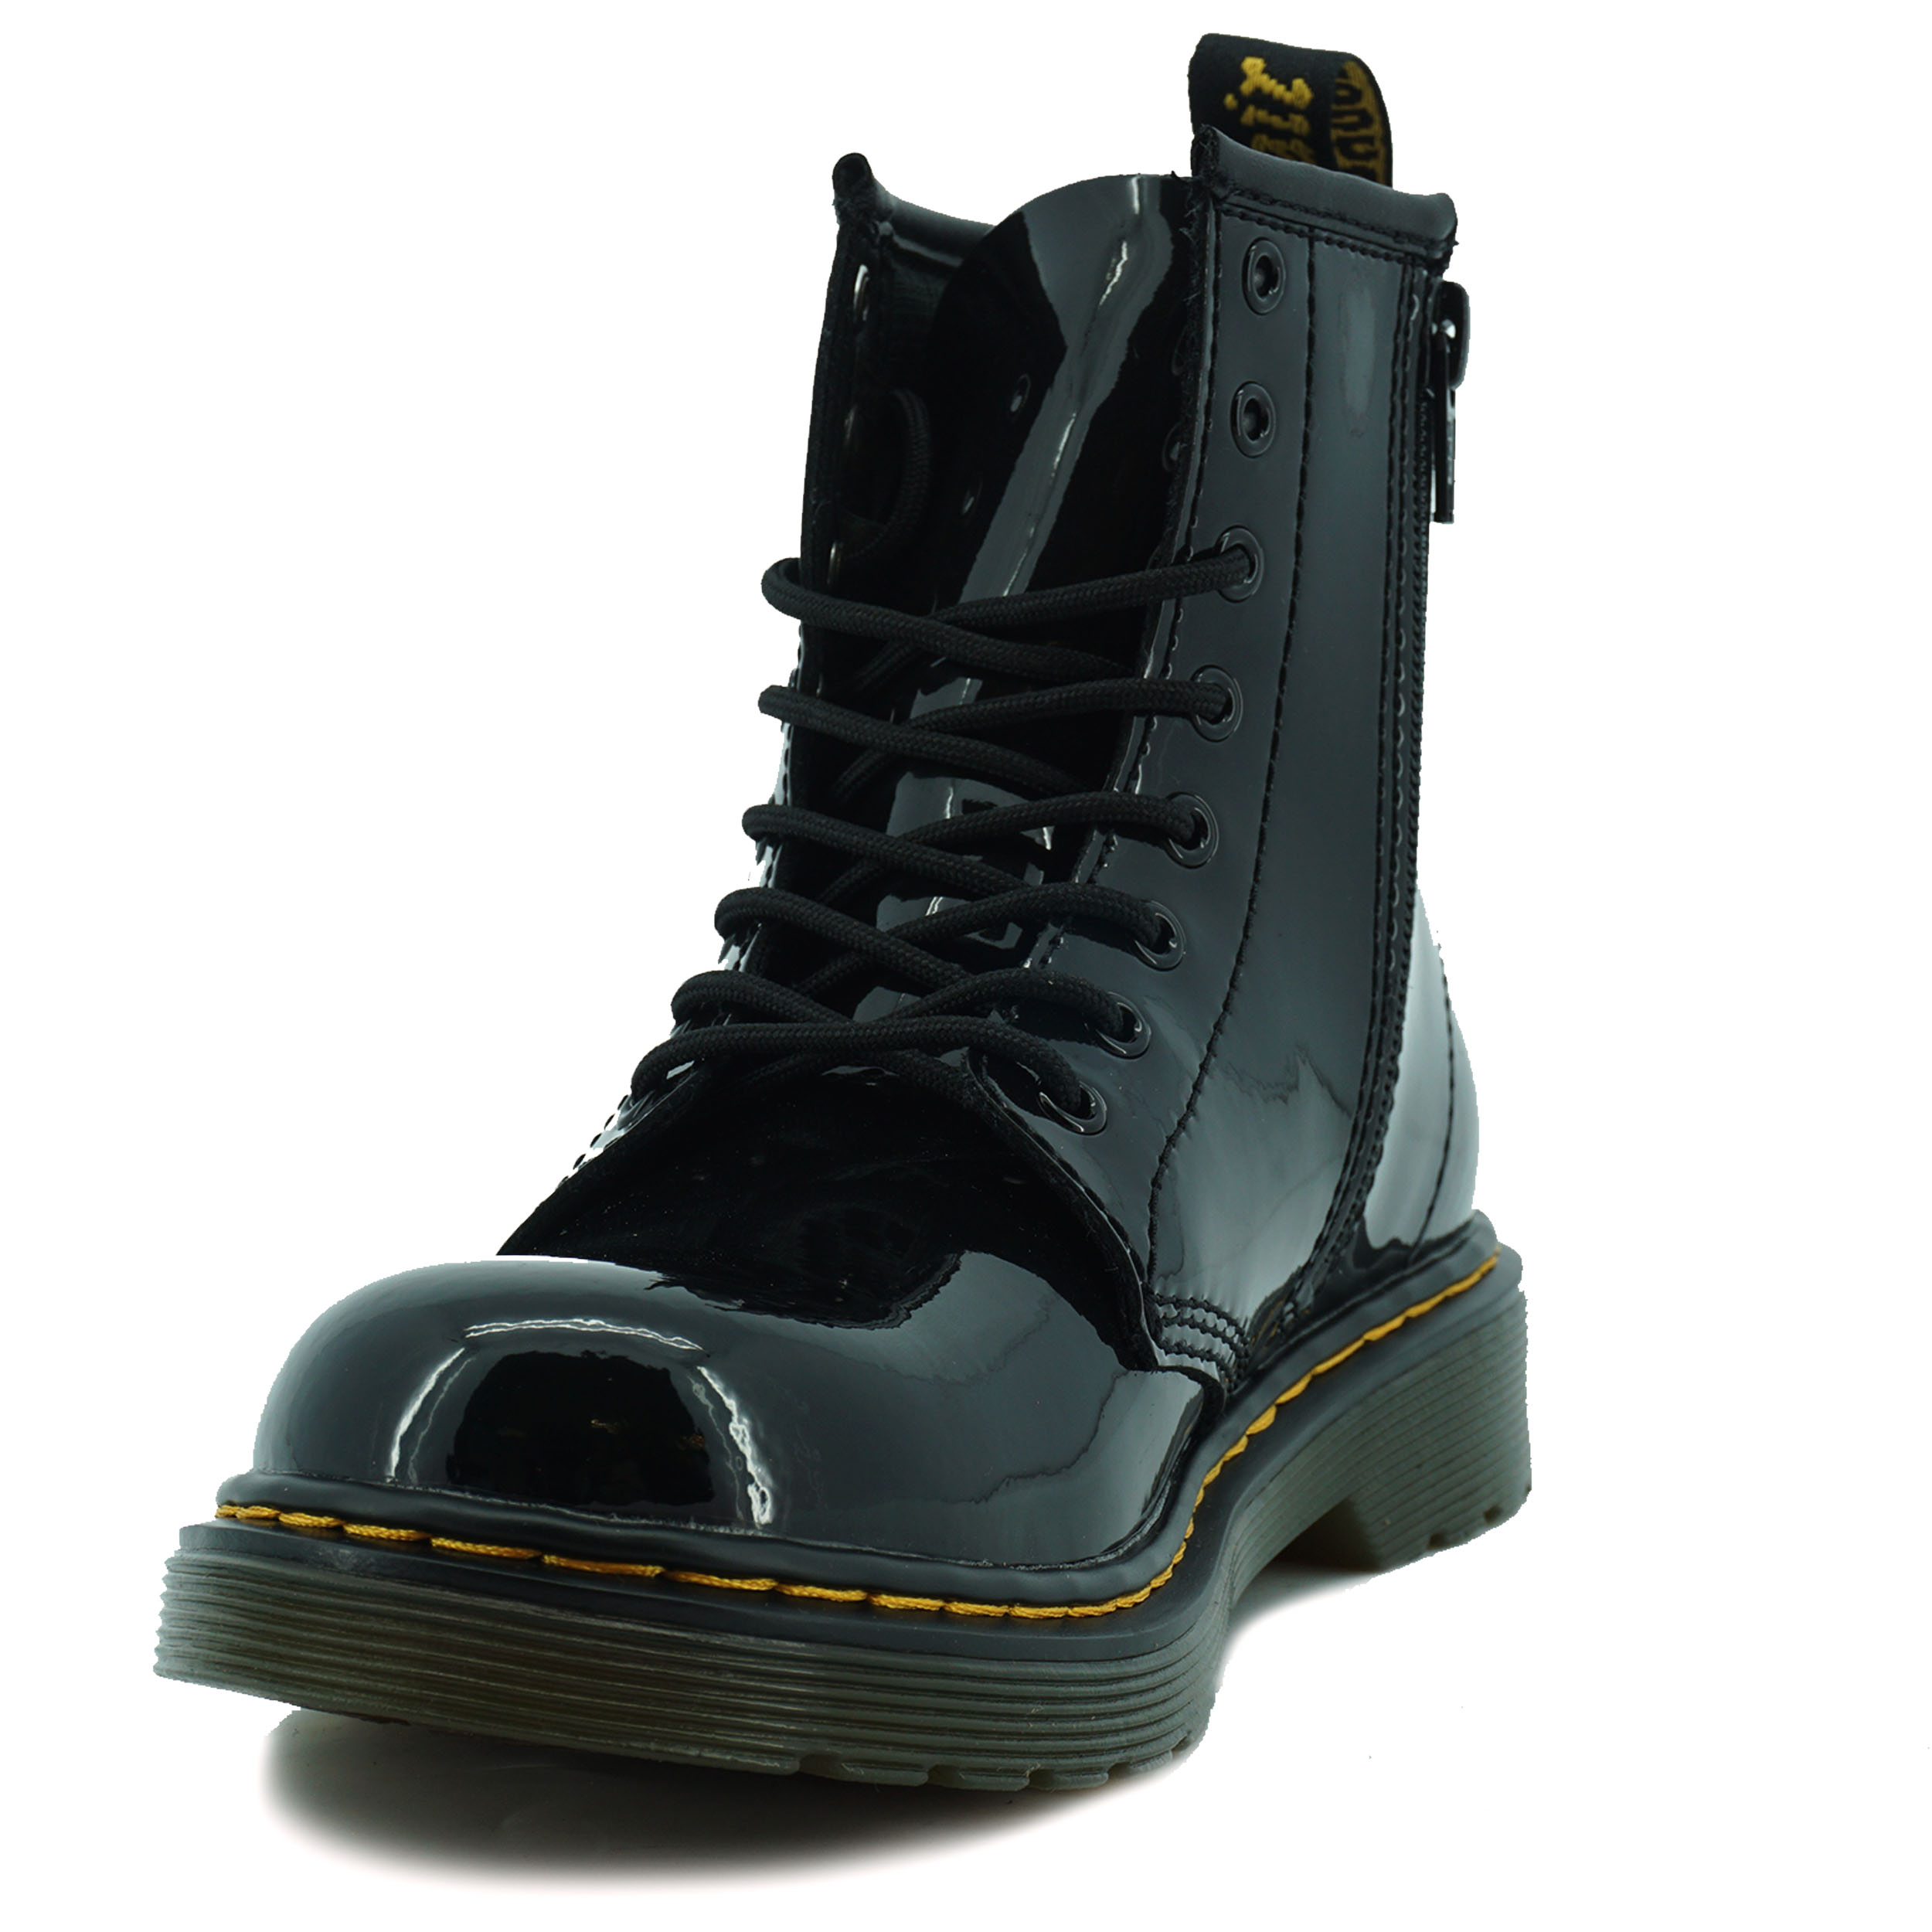 Dr. Martens 1460T Boot Patent Leather Black 